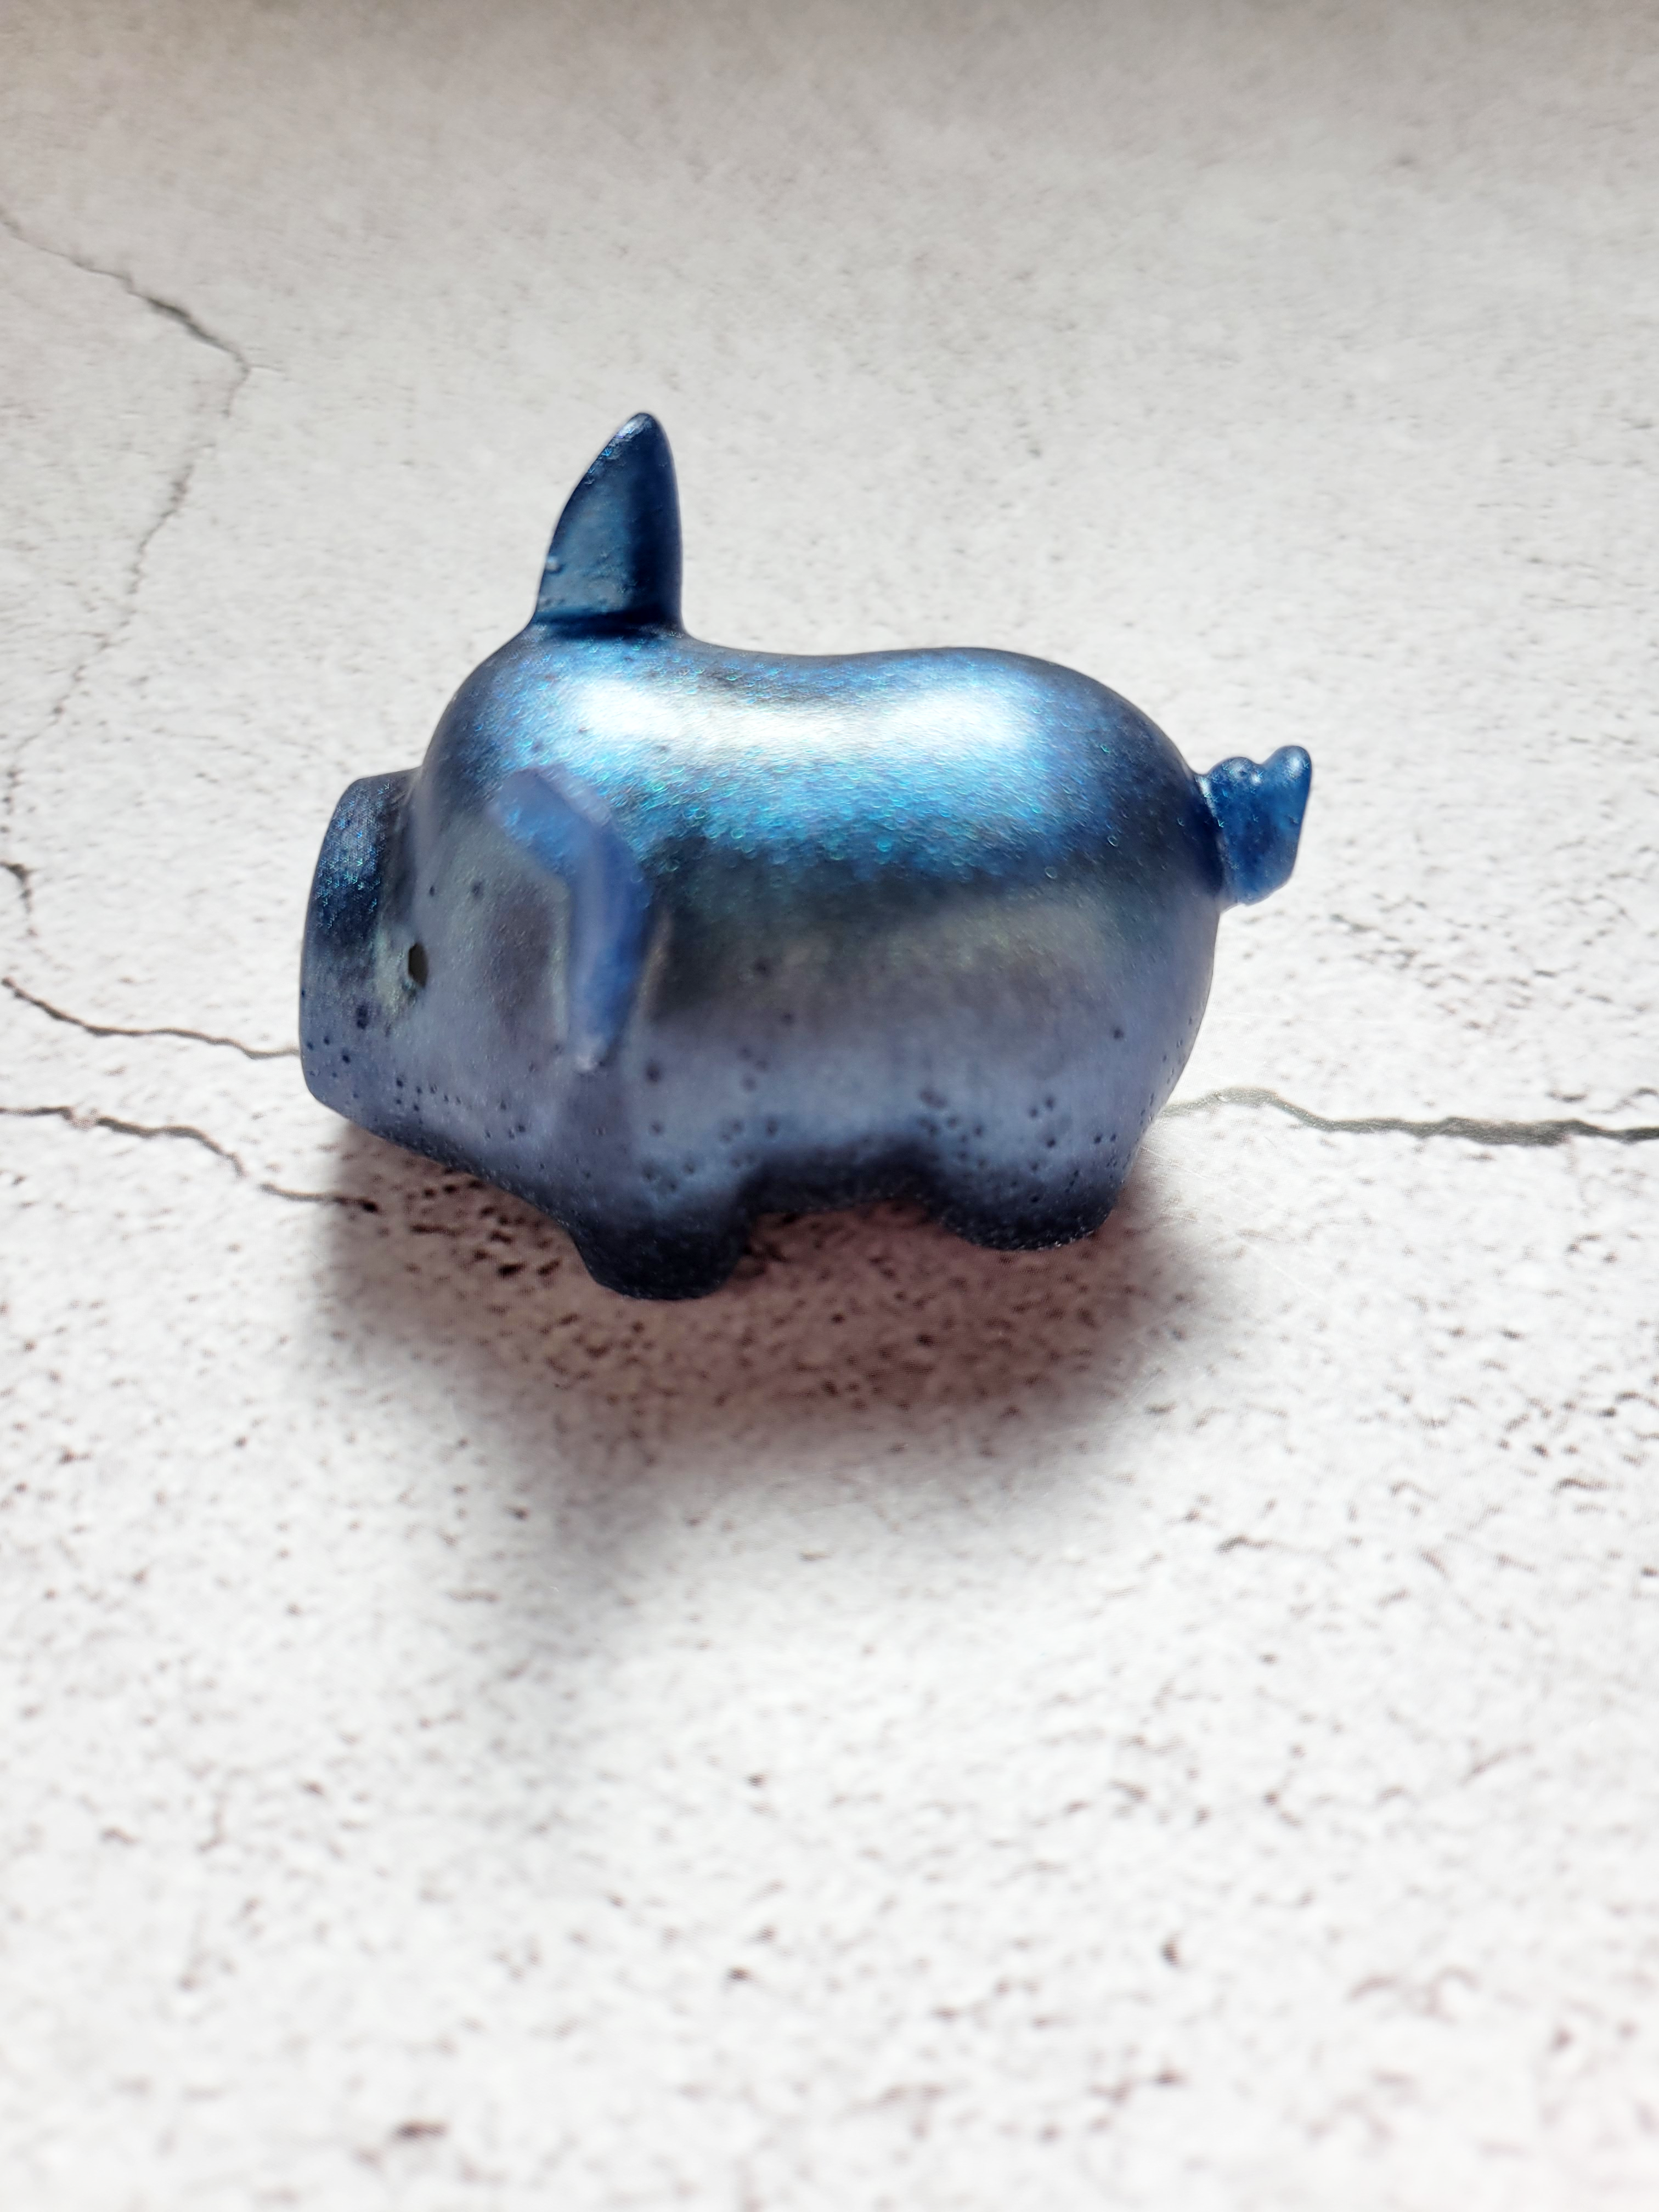 A side view of a fat pig figure. He's got black painted eyes and nostrils. He's a deep blue color.